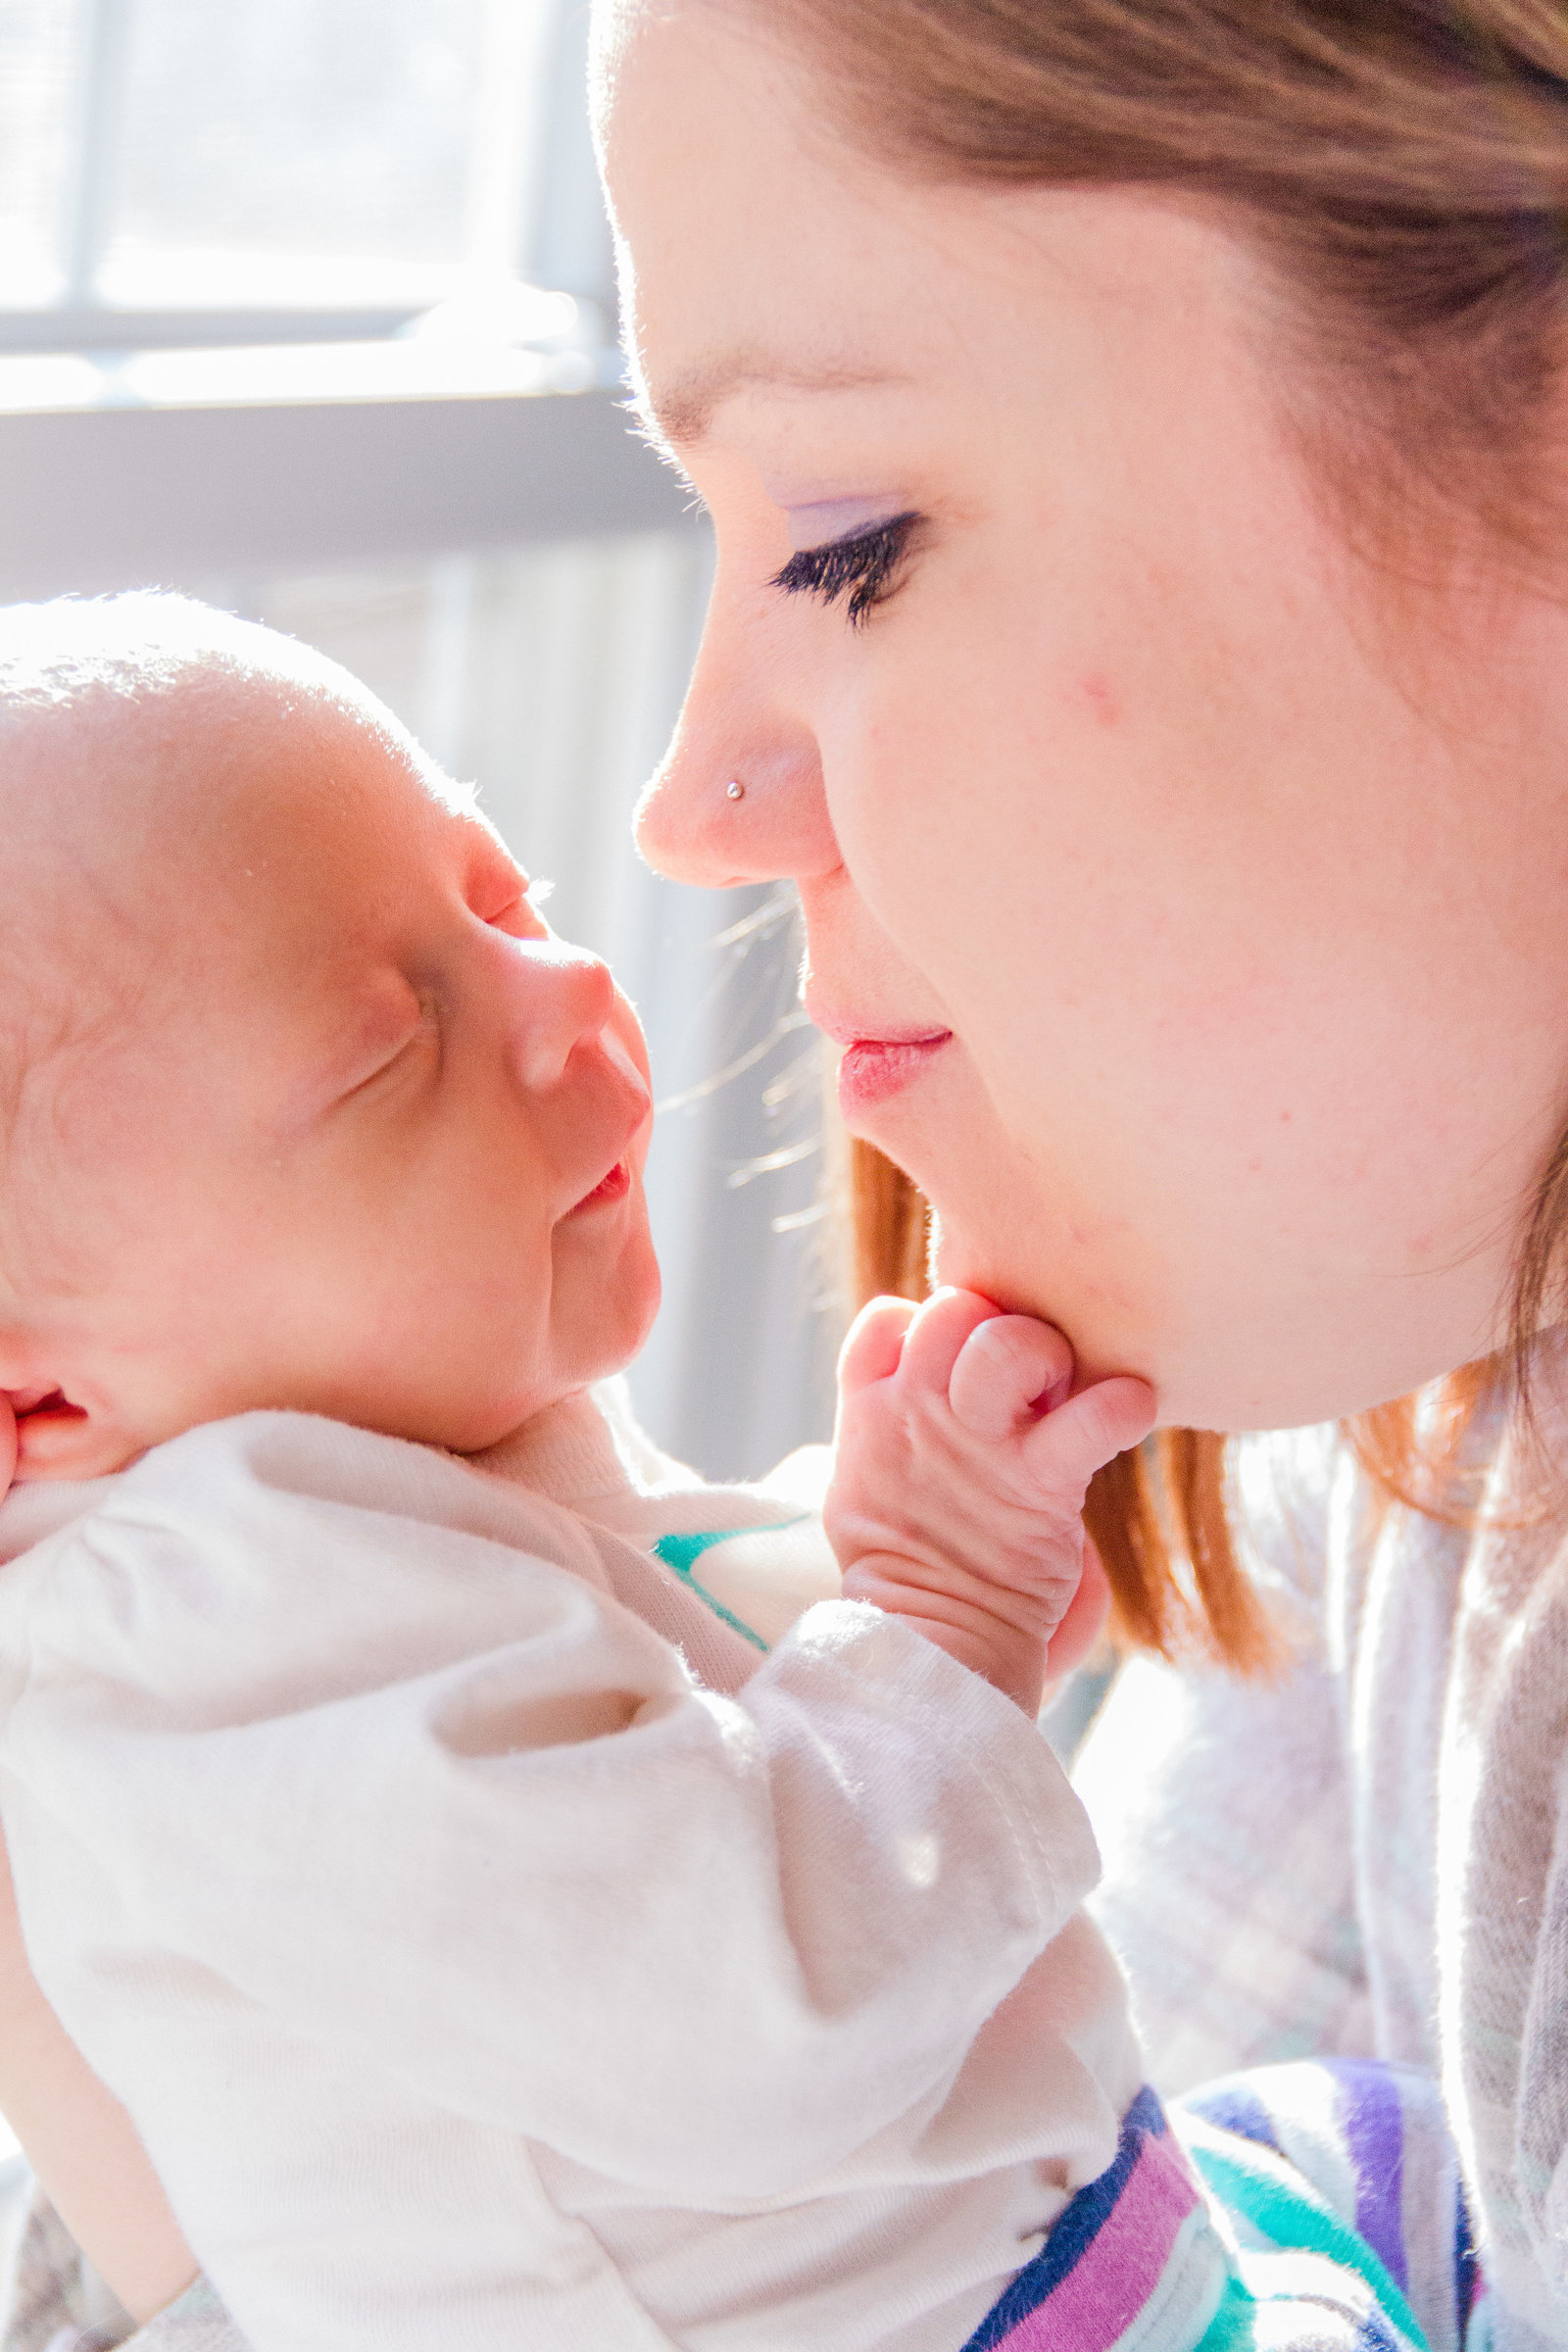 Newborn infant and mother touch noses